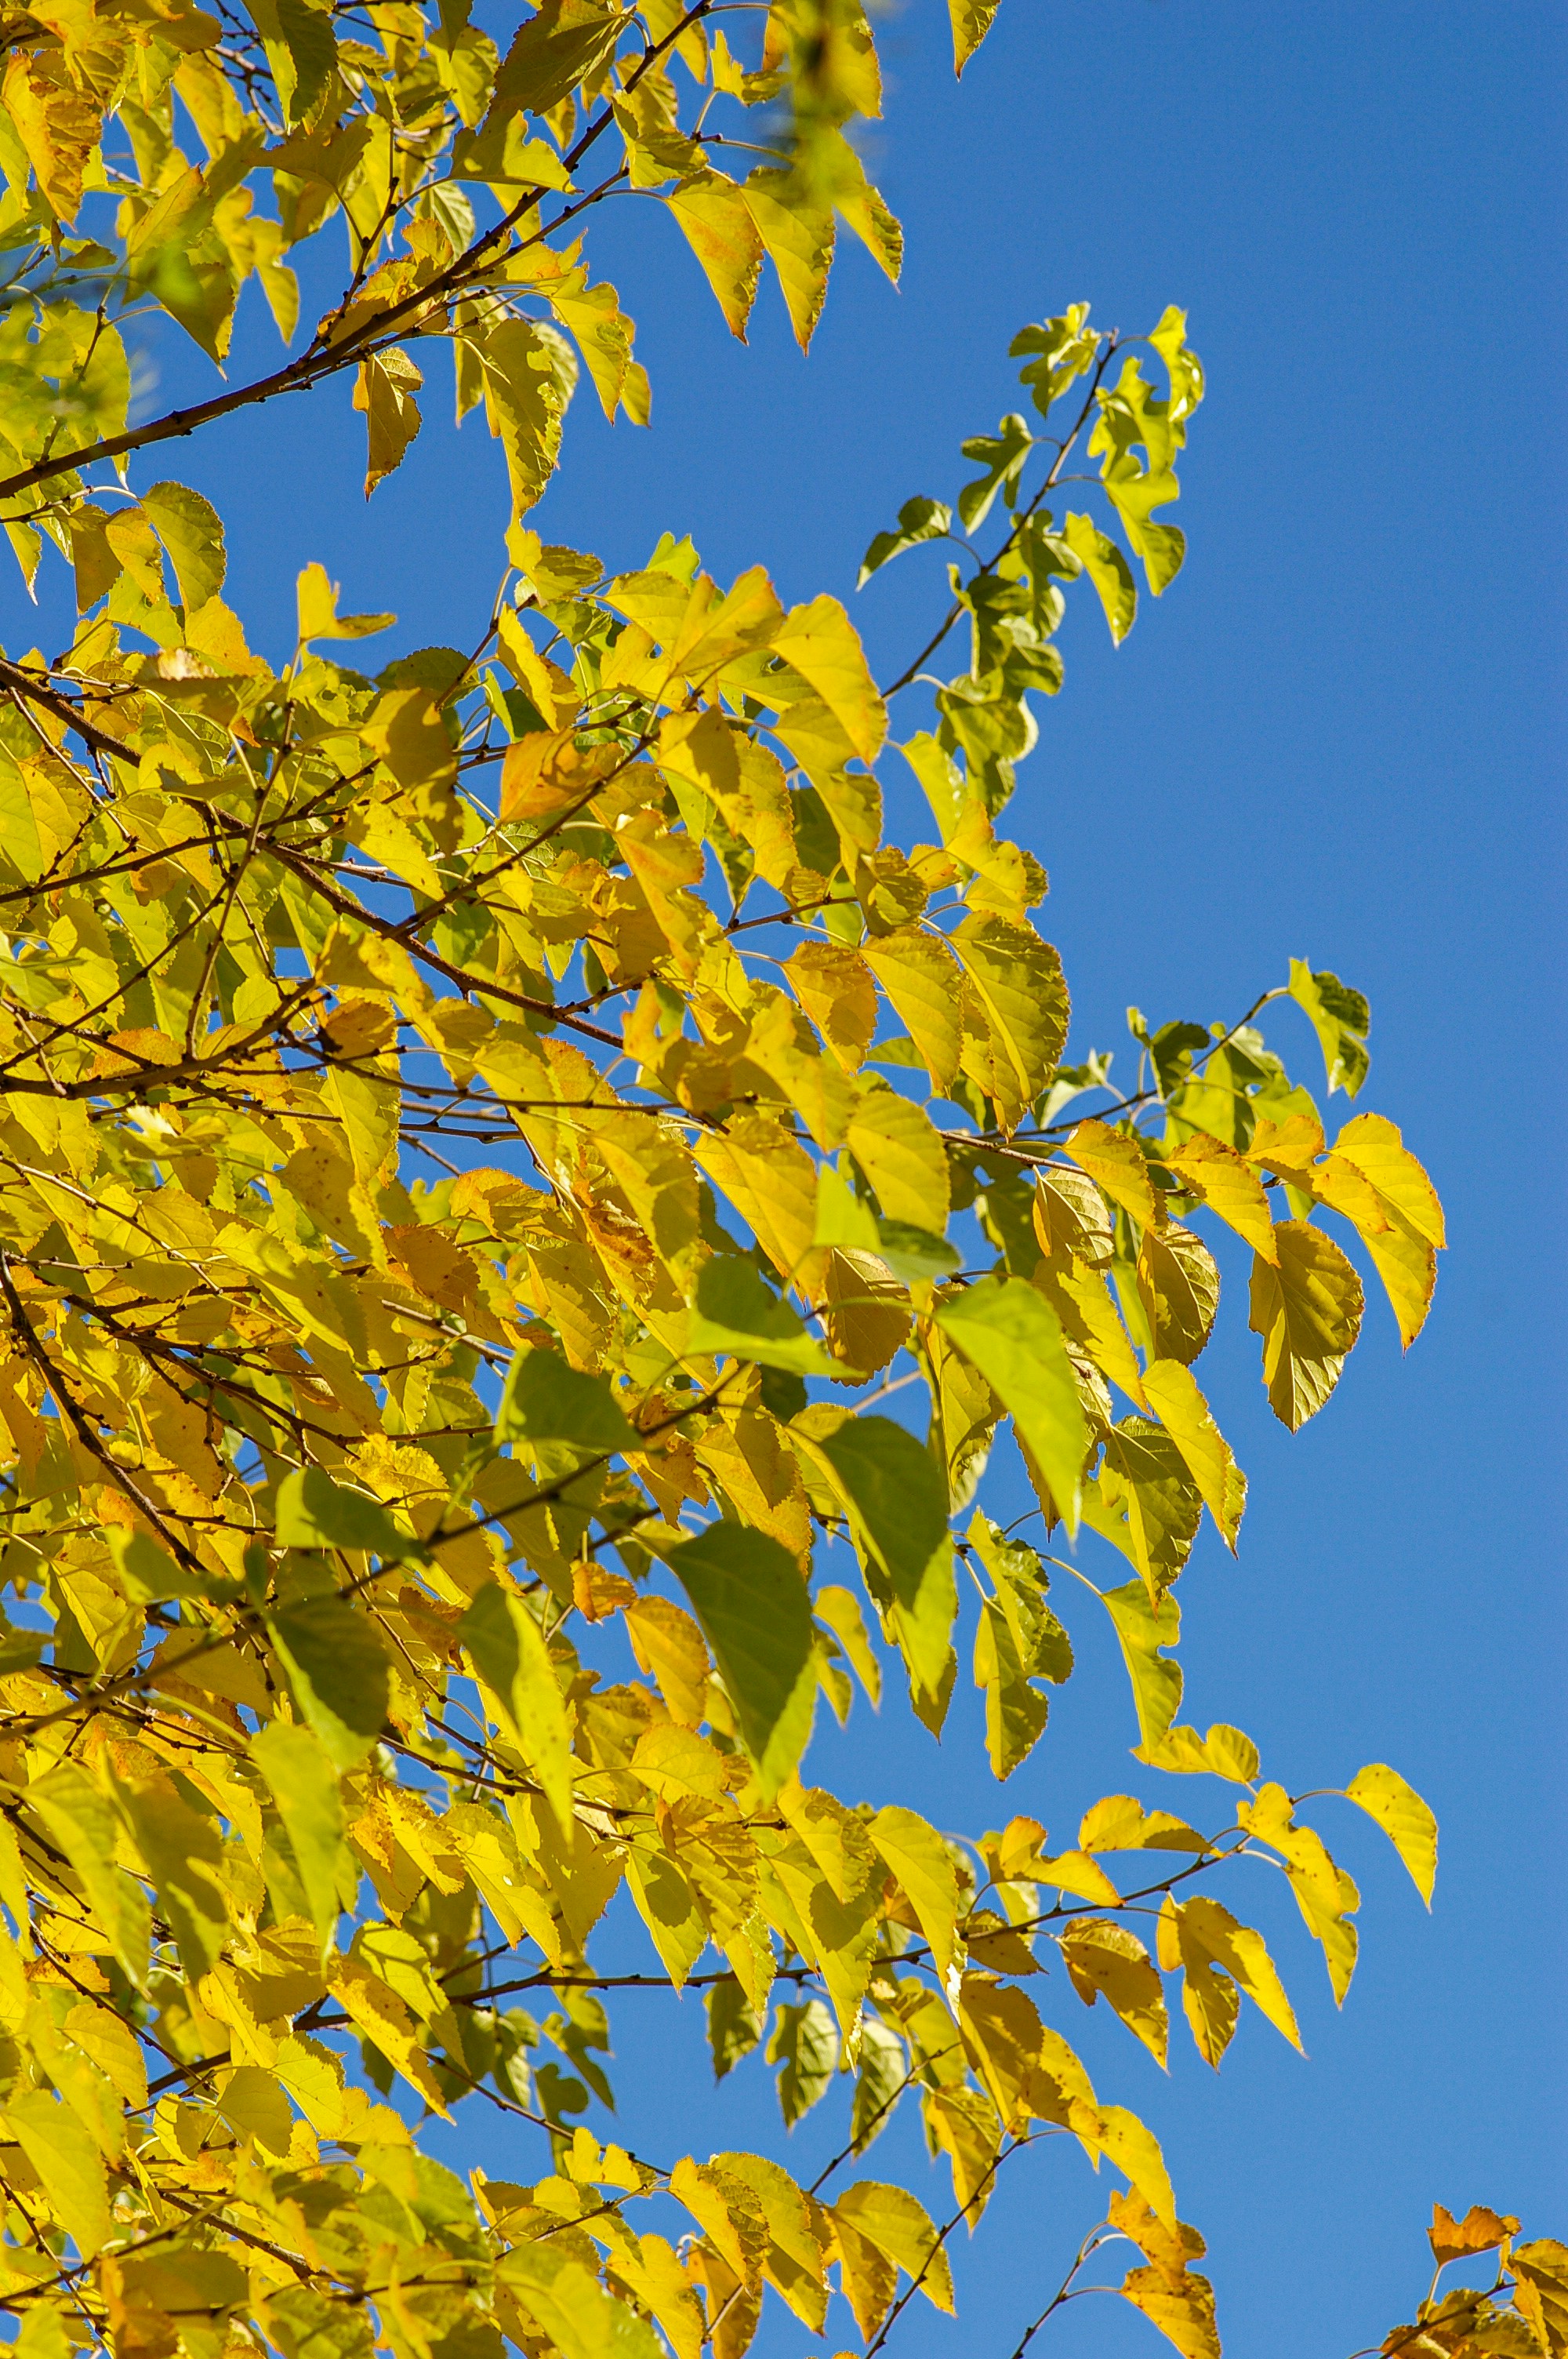 Yellow leaves on blue sky in autumn